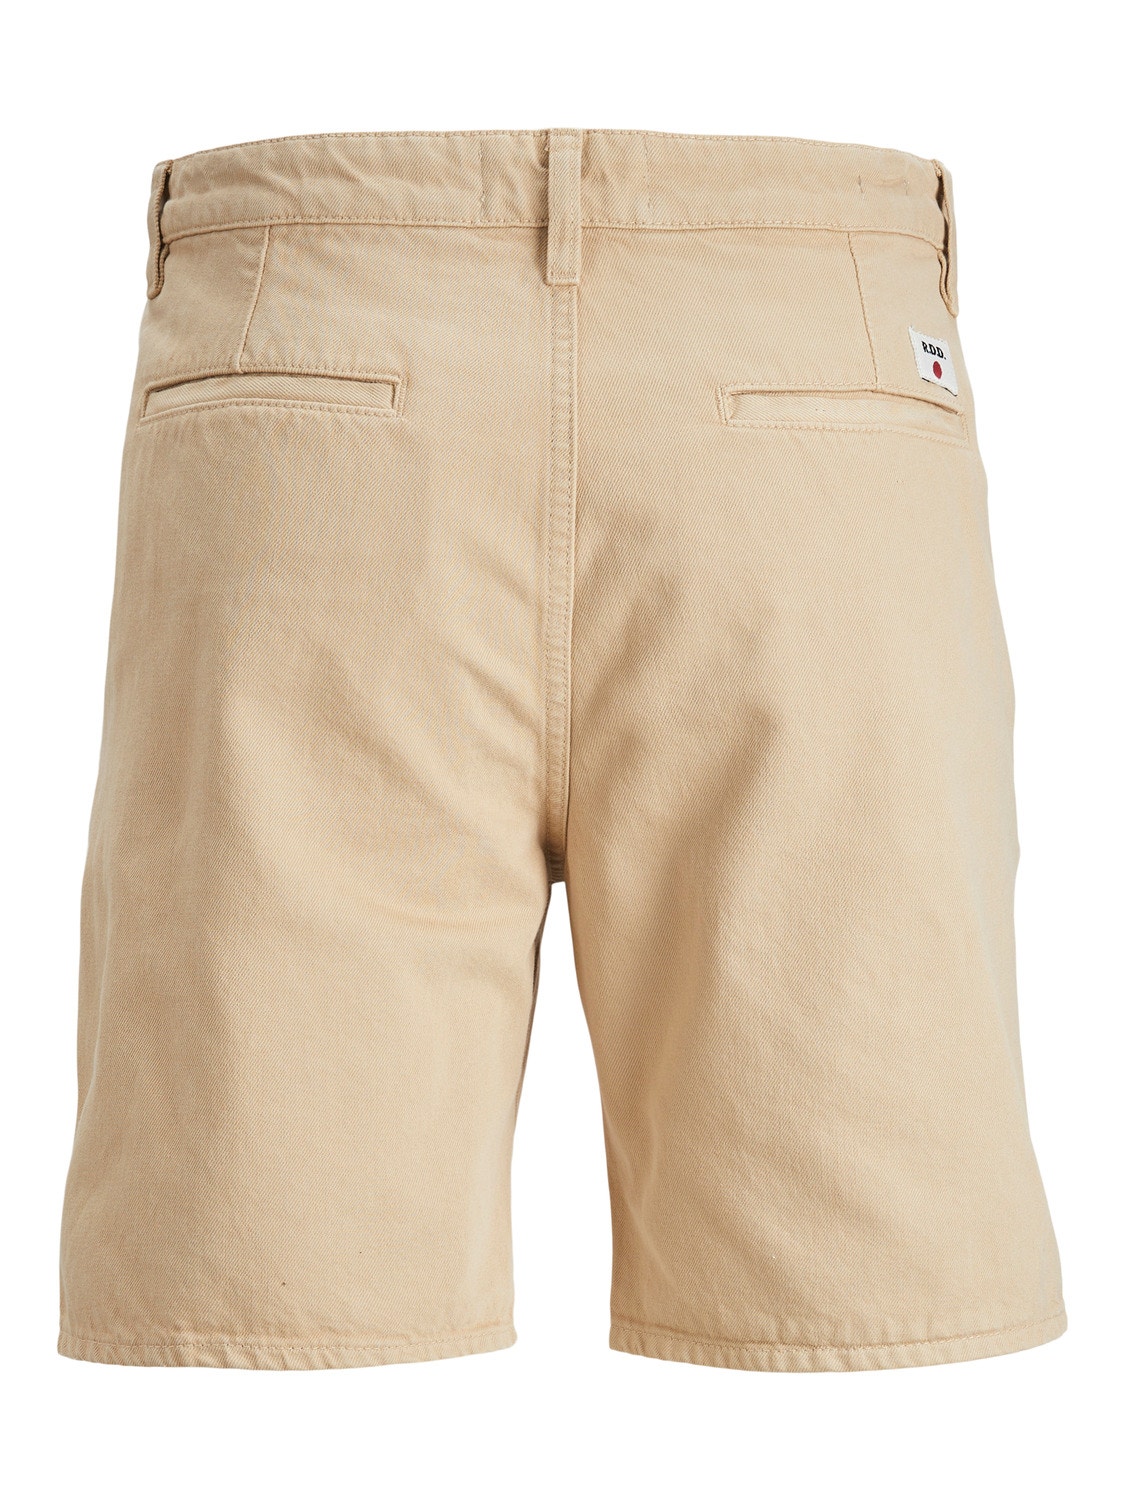 Jack & Jones RDD BERMUDA TIPO CHINO Relaxed Fit -Twill - 12235825